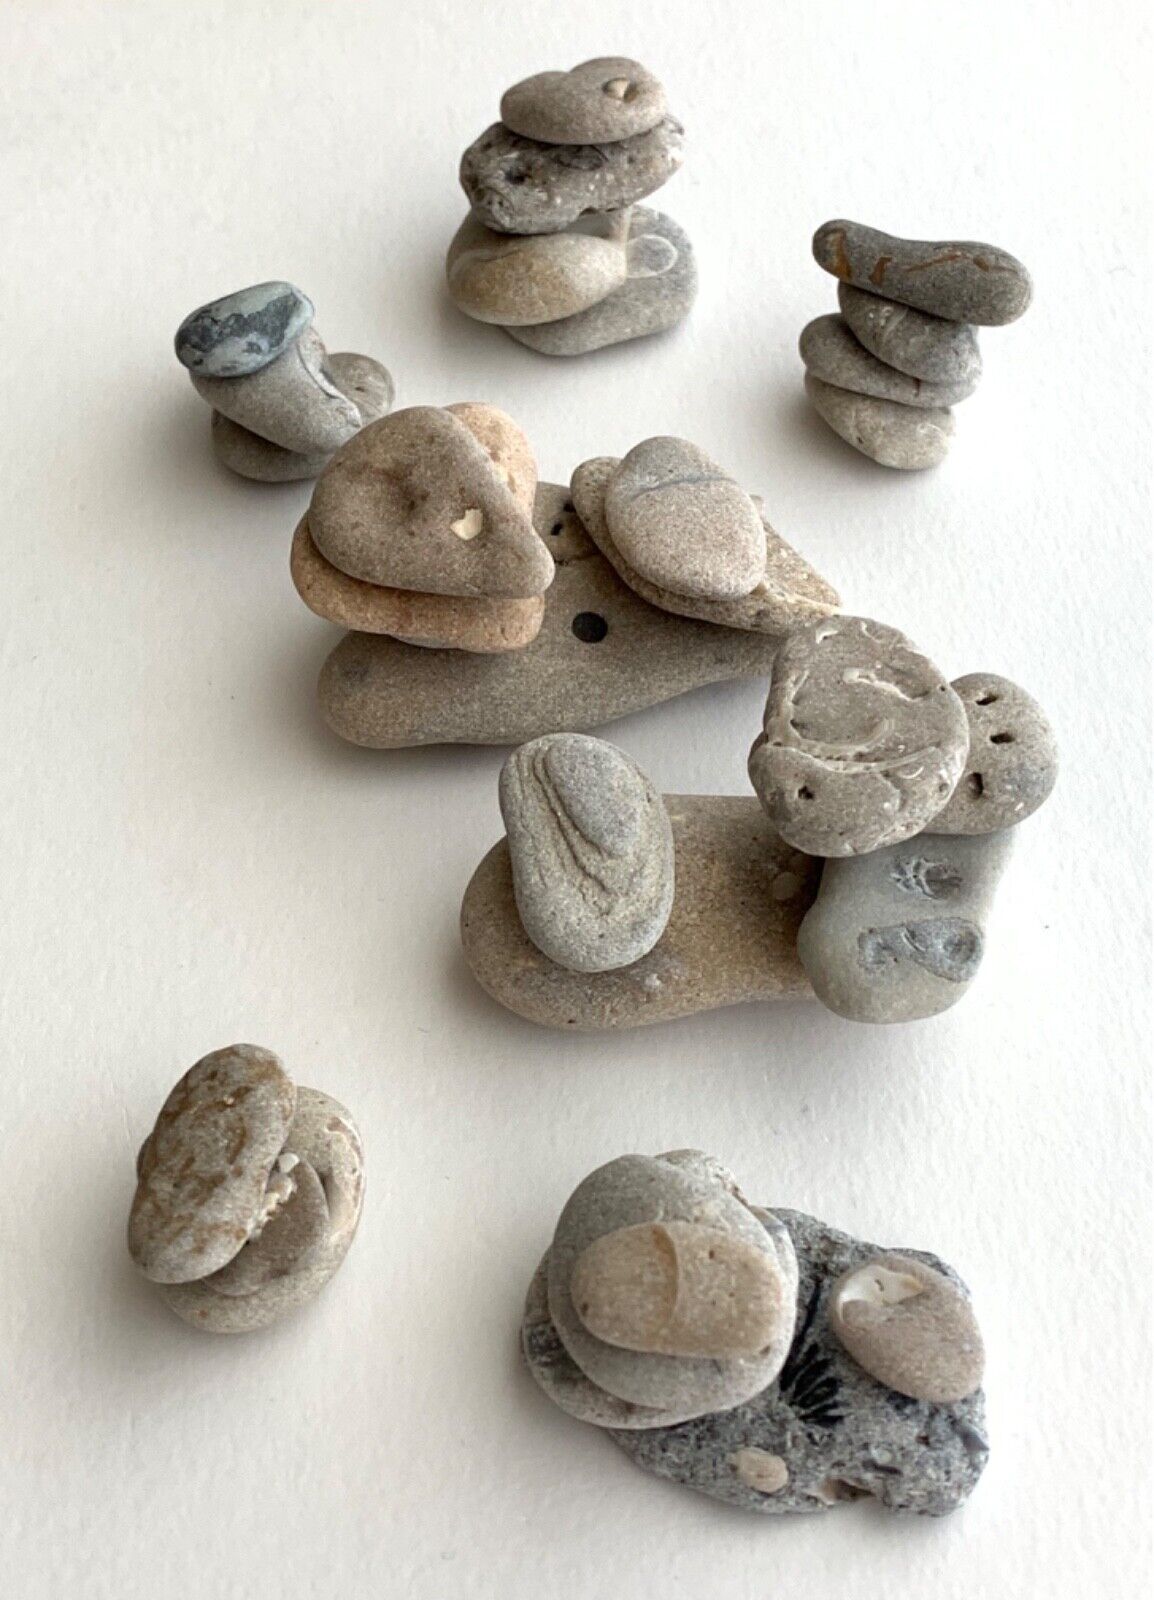 30 pc Natural small Beach Stones Cairn Rocks pebble art craft Stacking #C5 USA